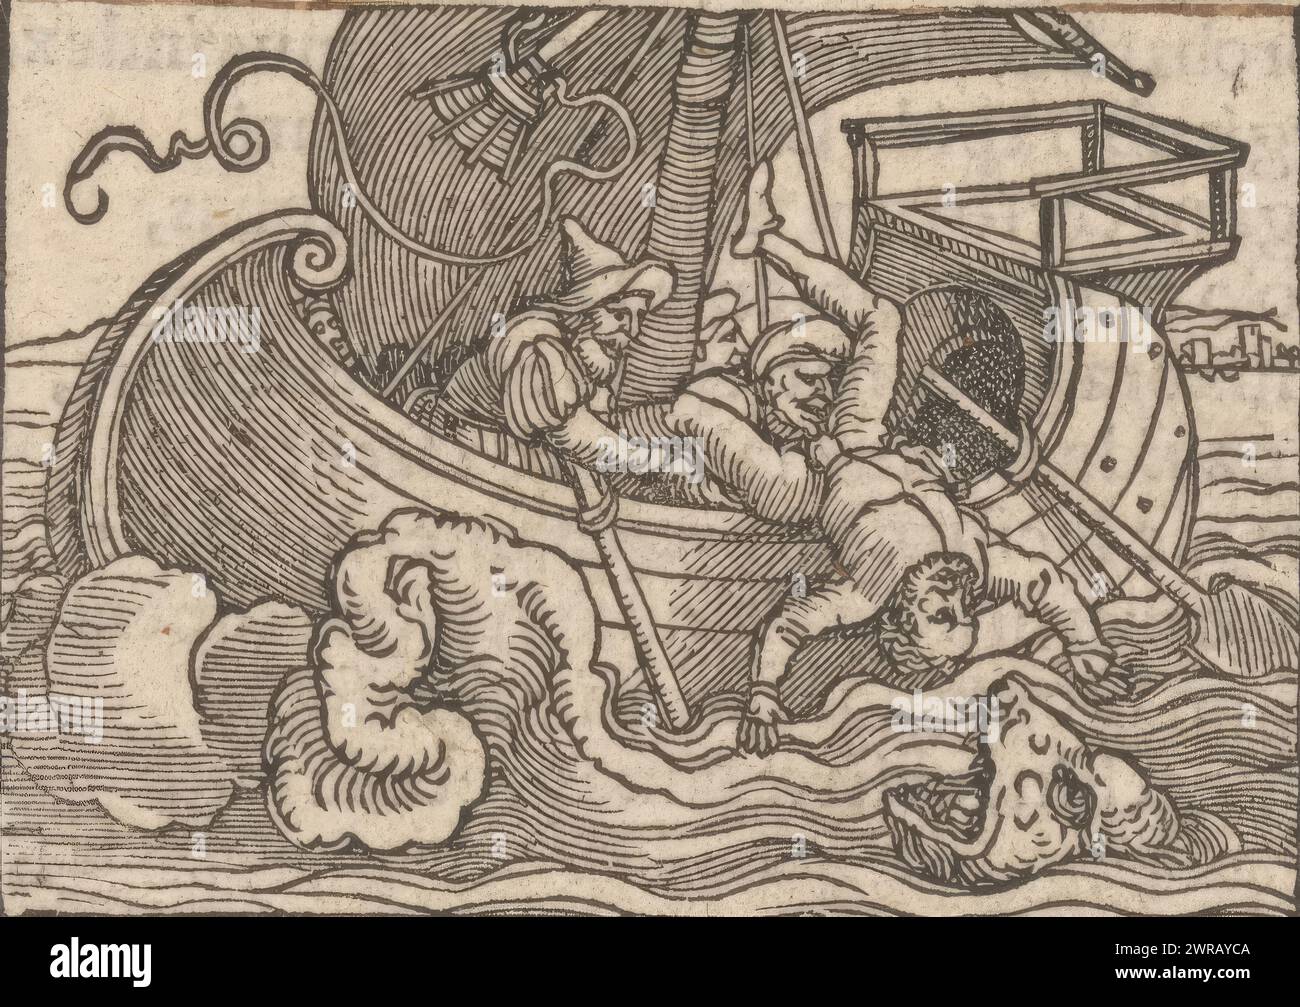 Jonah is thrown overboard into the whale's mouth, Historia Ionae prophetae (title on object), print maker: anonymous, after design by: Hans Sebald Beham, publisher: Christian Egenollf, 1530 - 1533, paper, height 50 mm × width 70 mm, print Stock Photo